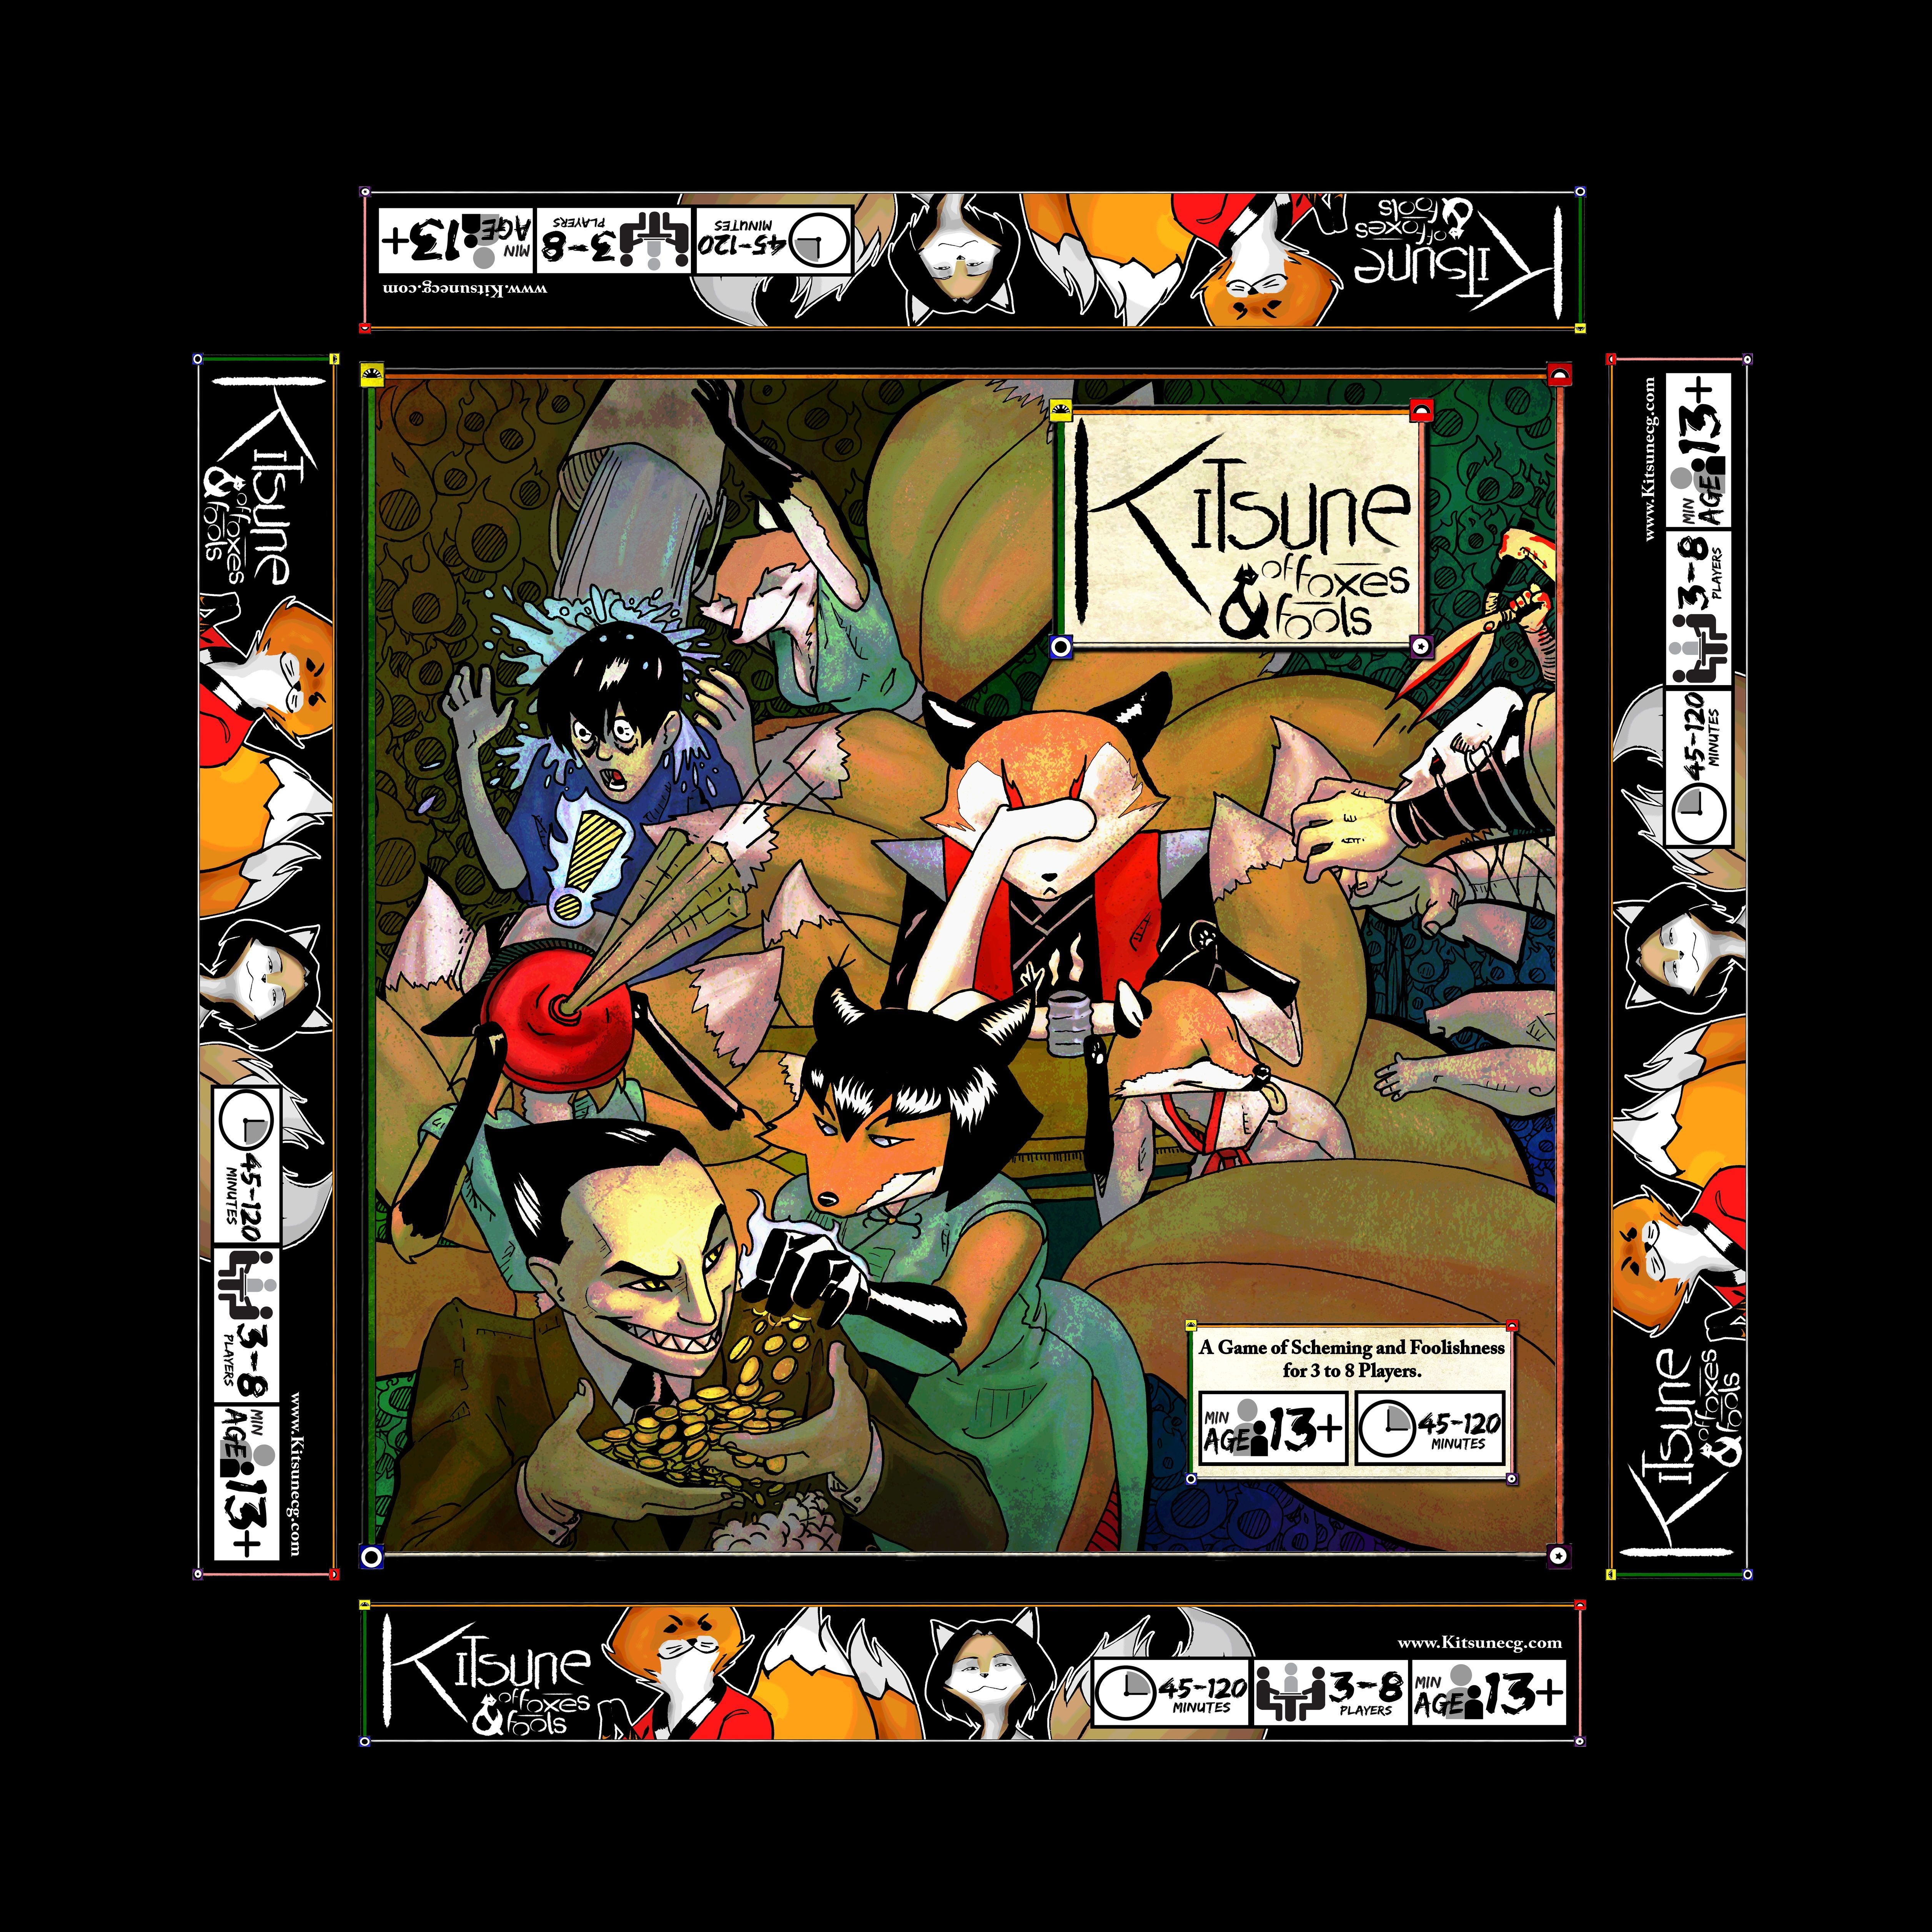 Kitsune: of Foxes and Fools